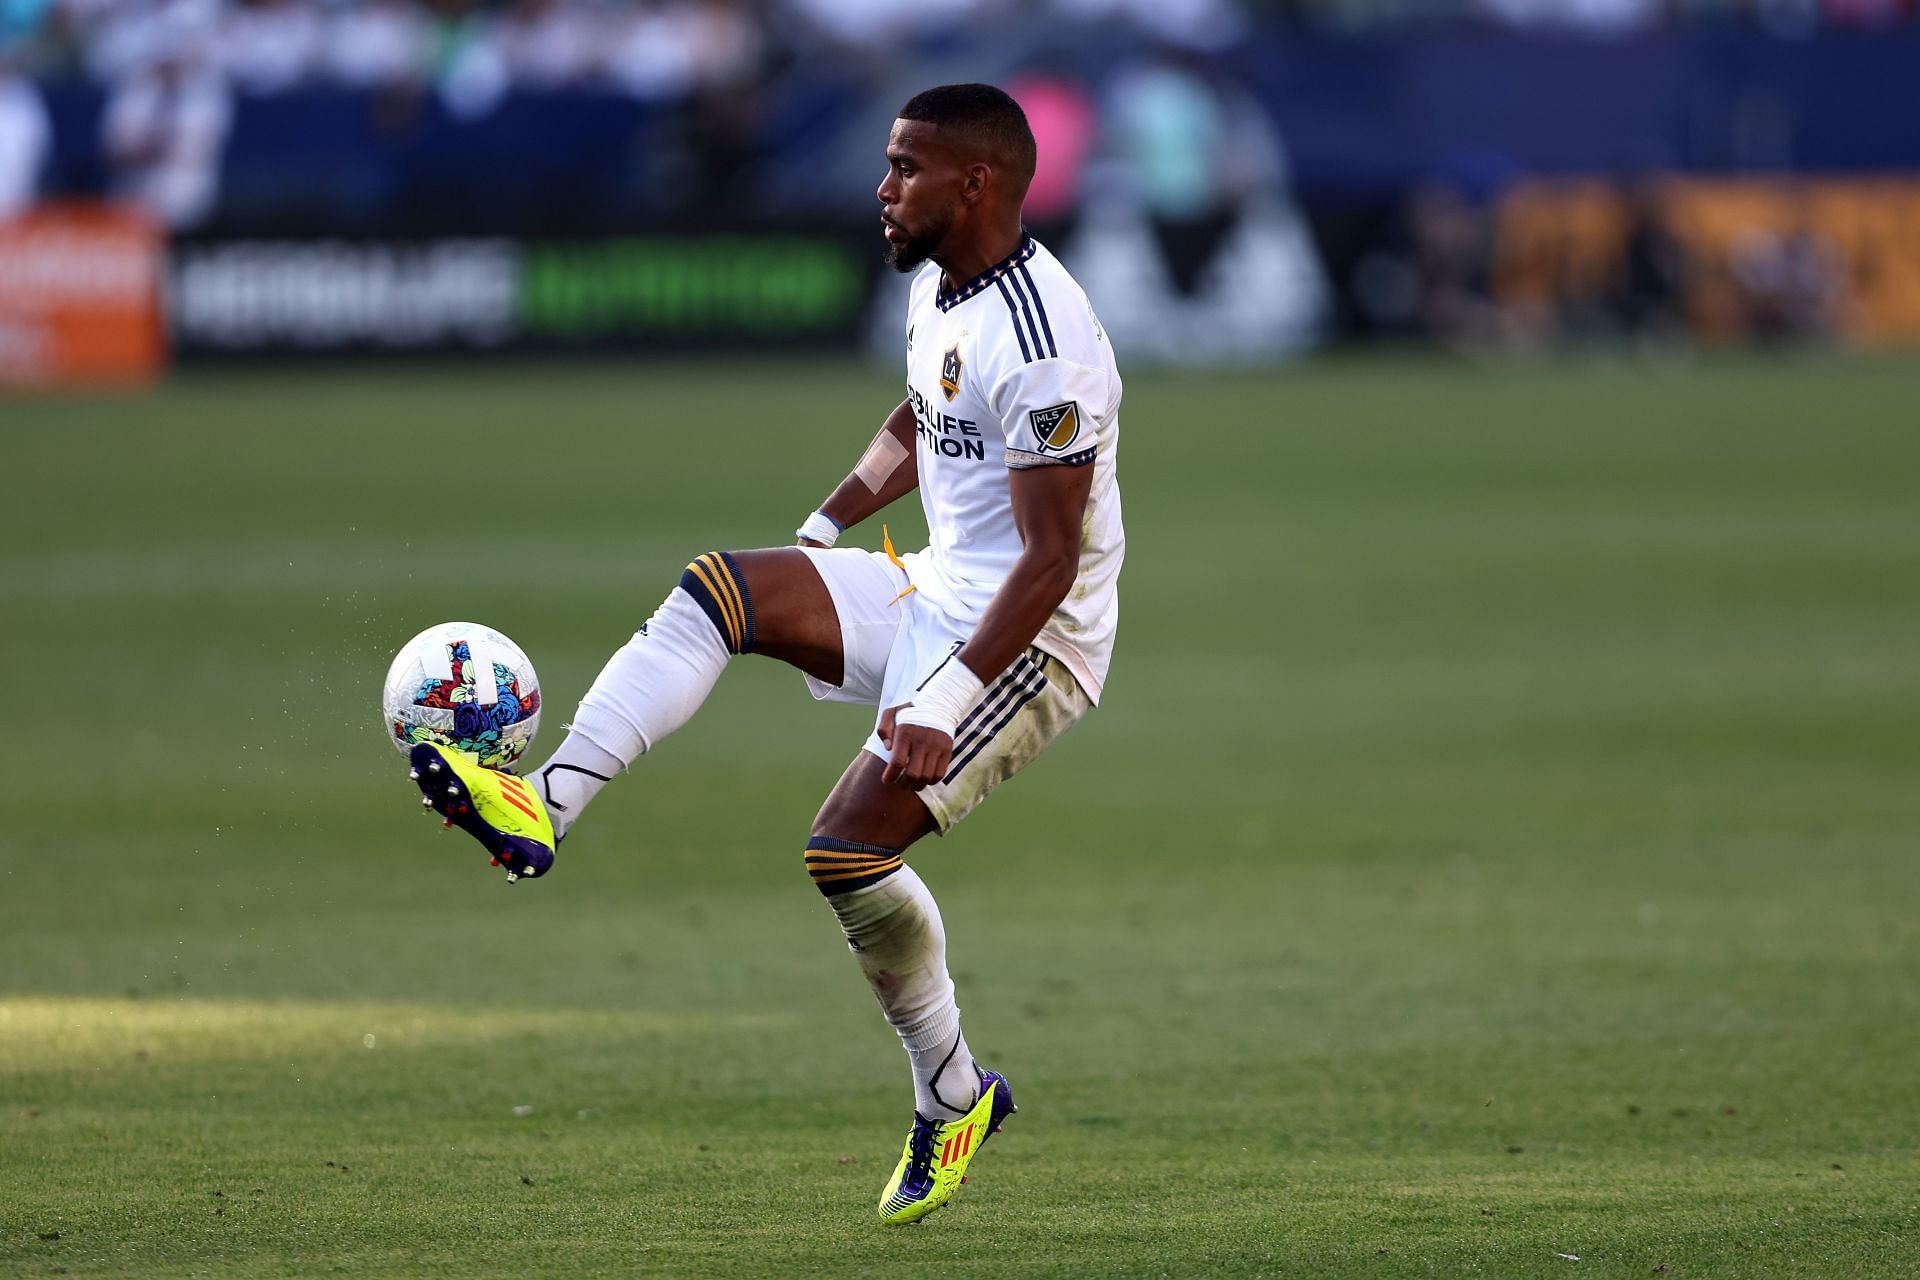 Los Angeles Galaxy are in action against Nashville on Saturday